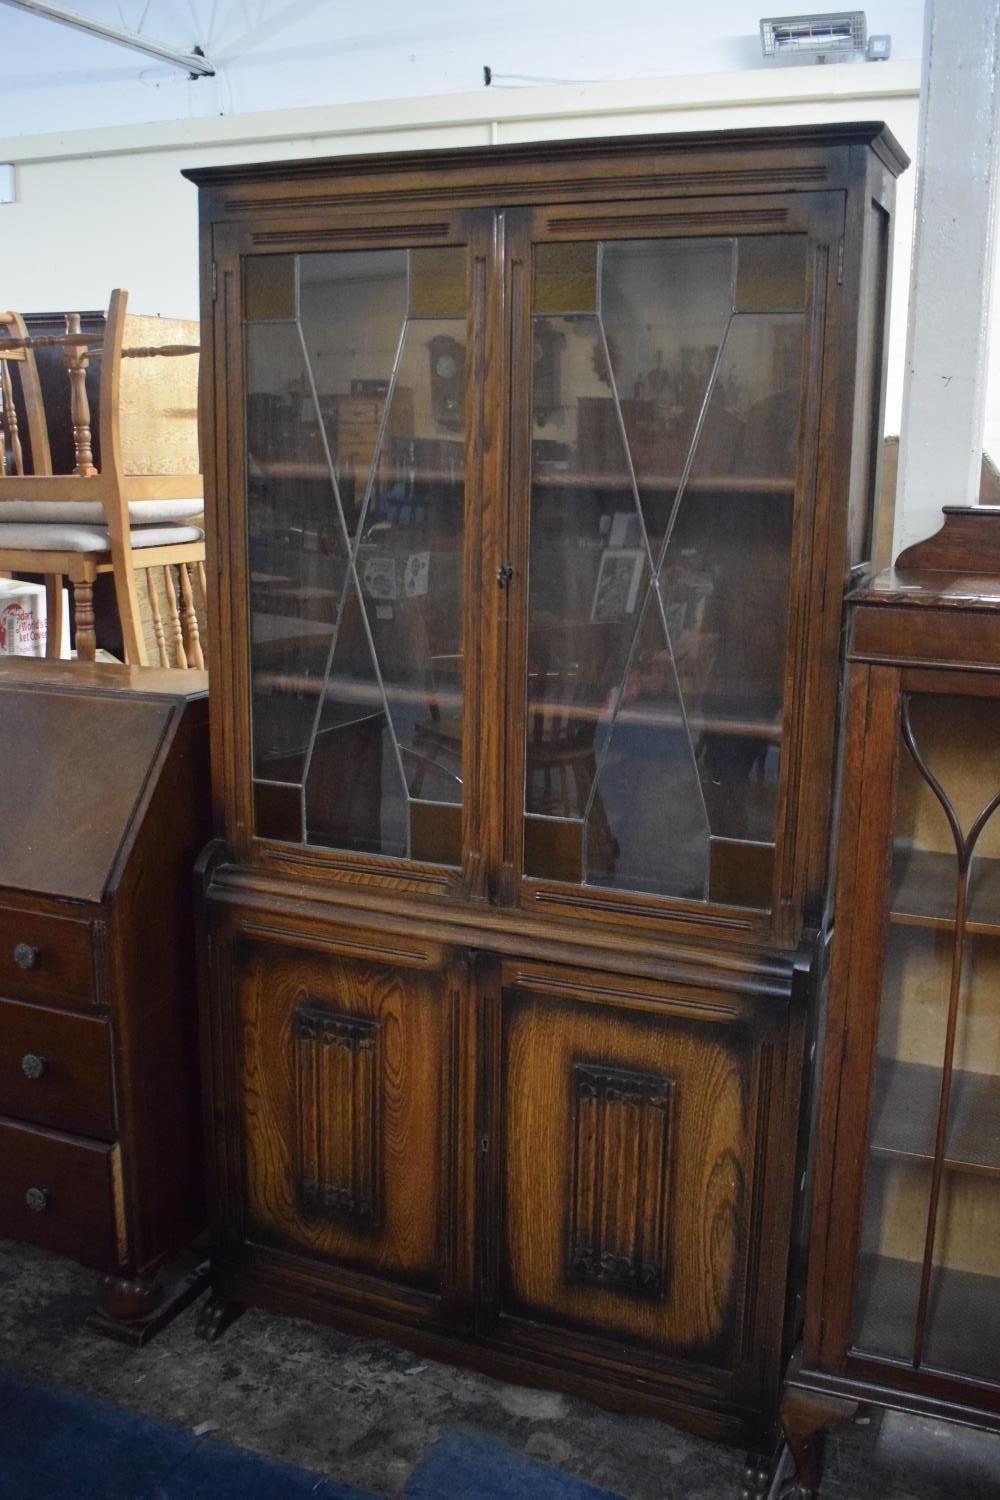 A Mid 20th Century Oak Linenfold Bookcase (One Glass Pane Cracked), 91cms Wide